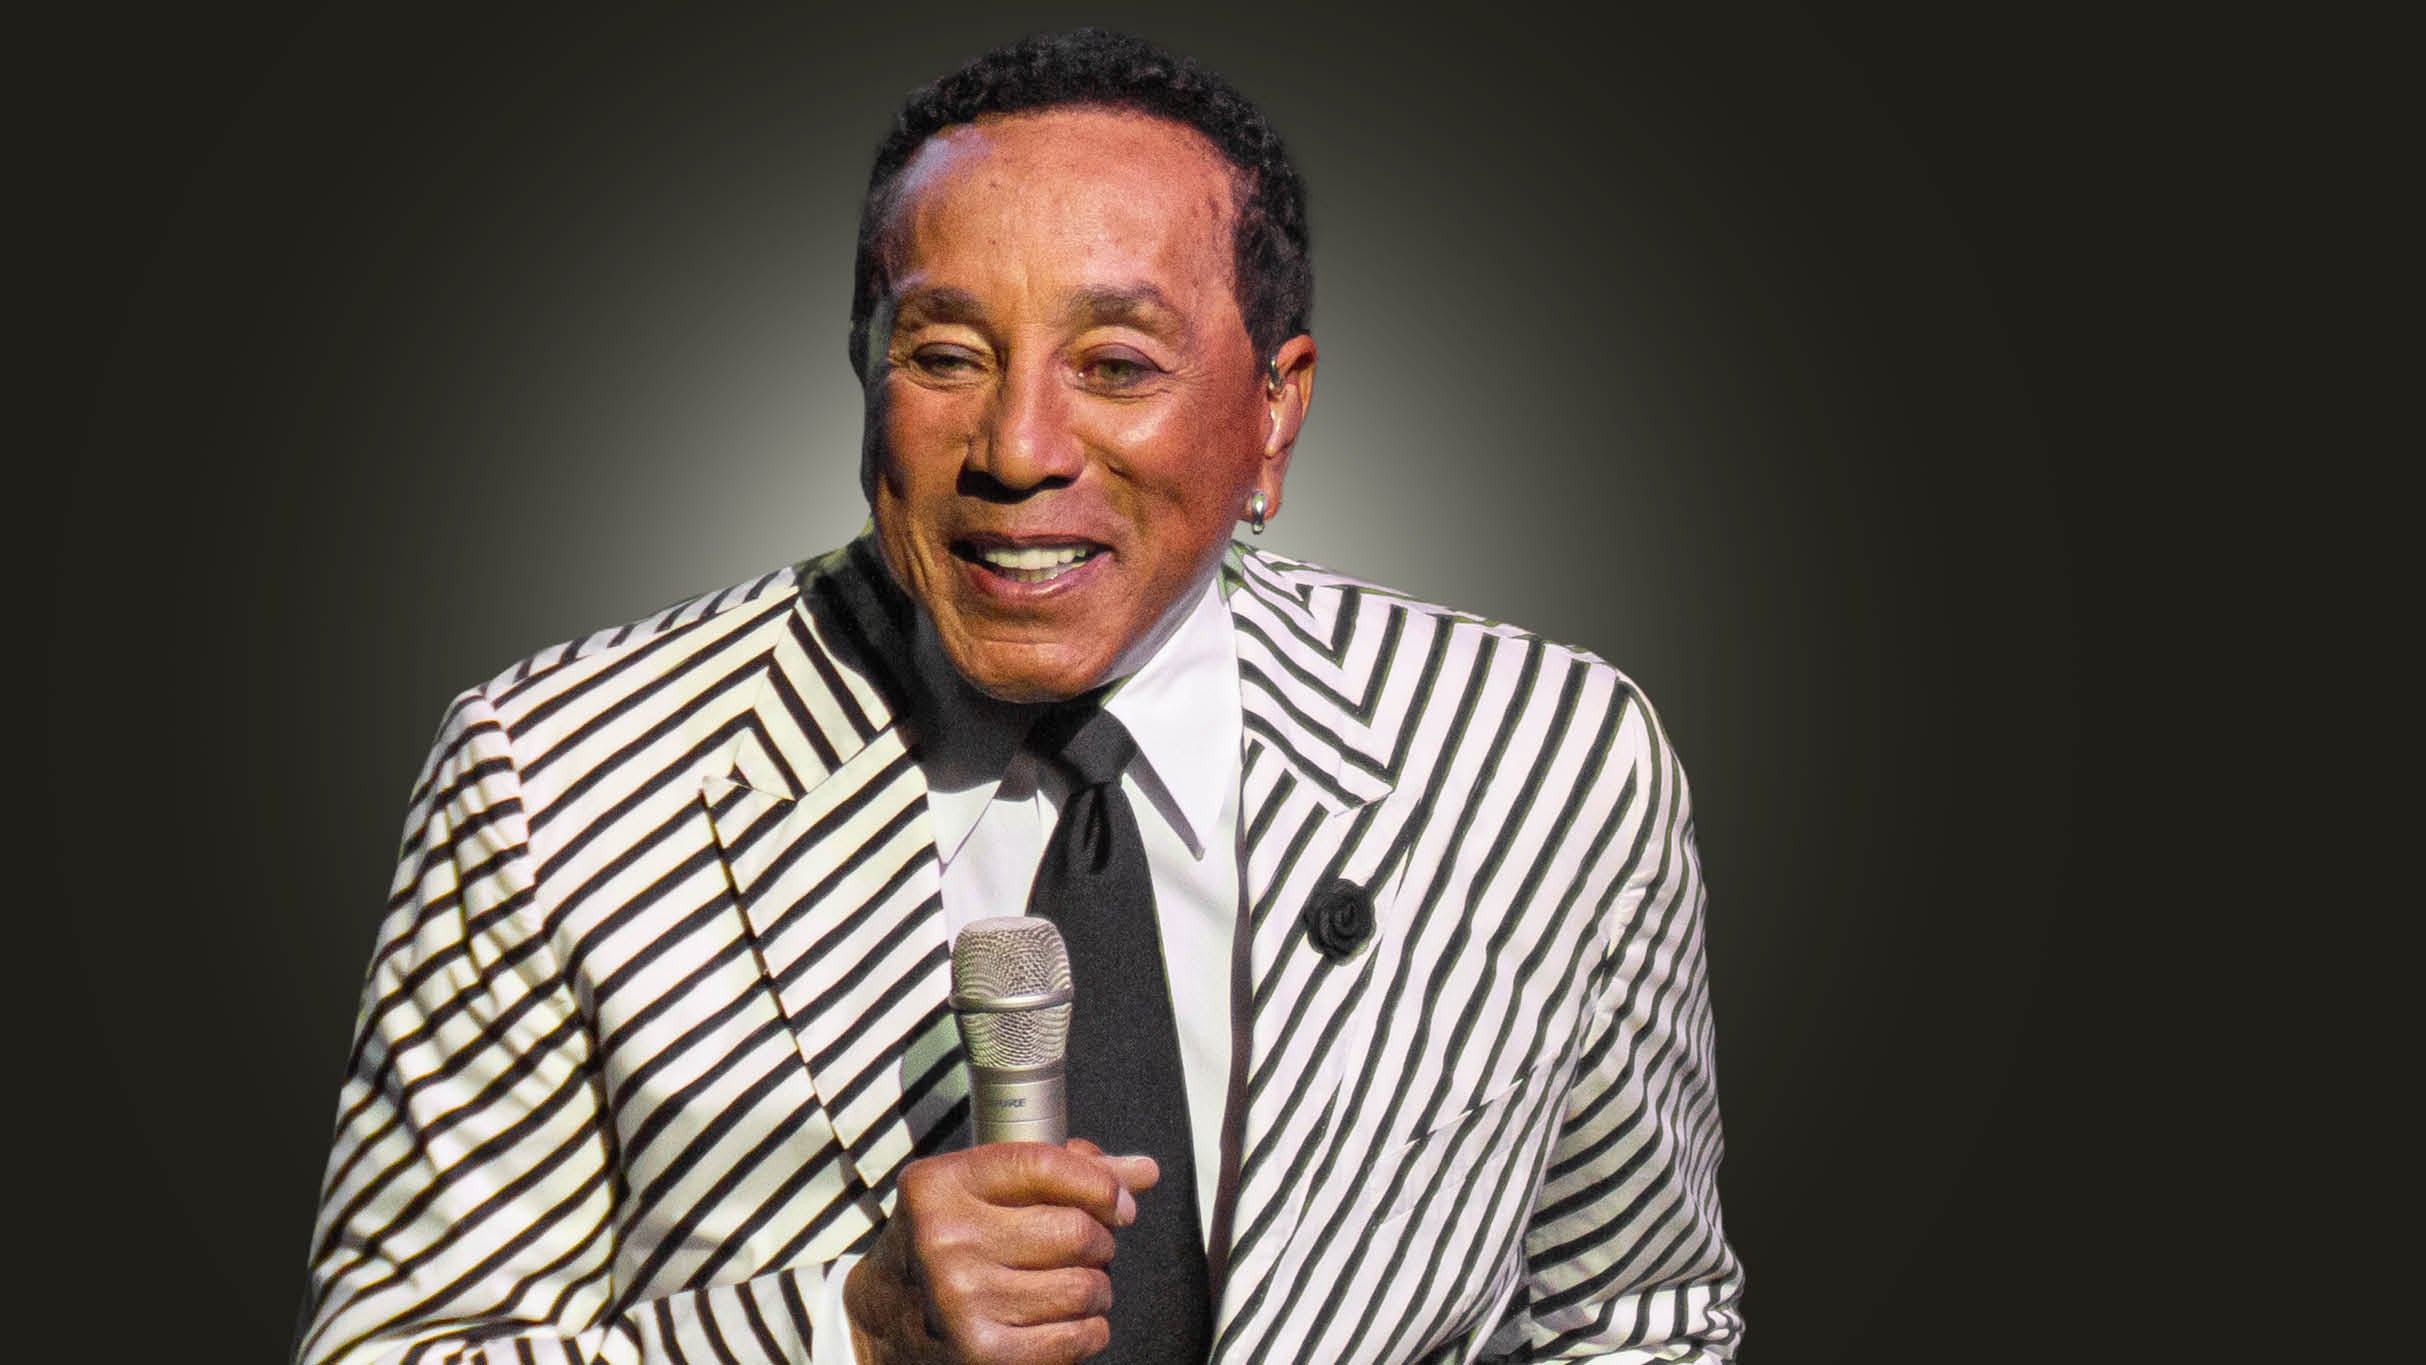 Smokey Robinson: Soulfully Yours presale code for concert tickets in Las Vegas, NV (The Venetian Theatre at The Venetian Resort)